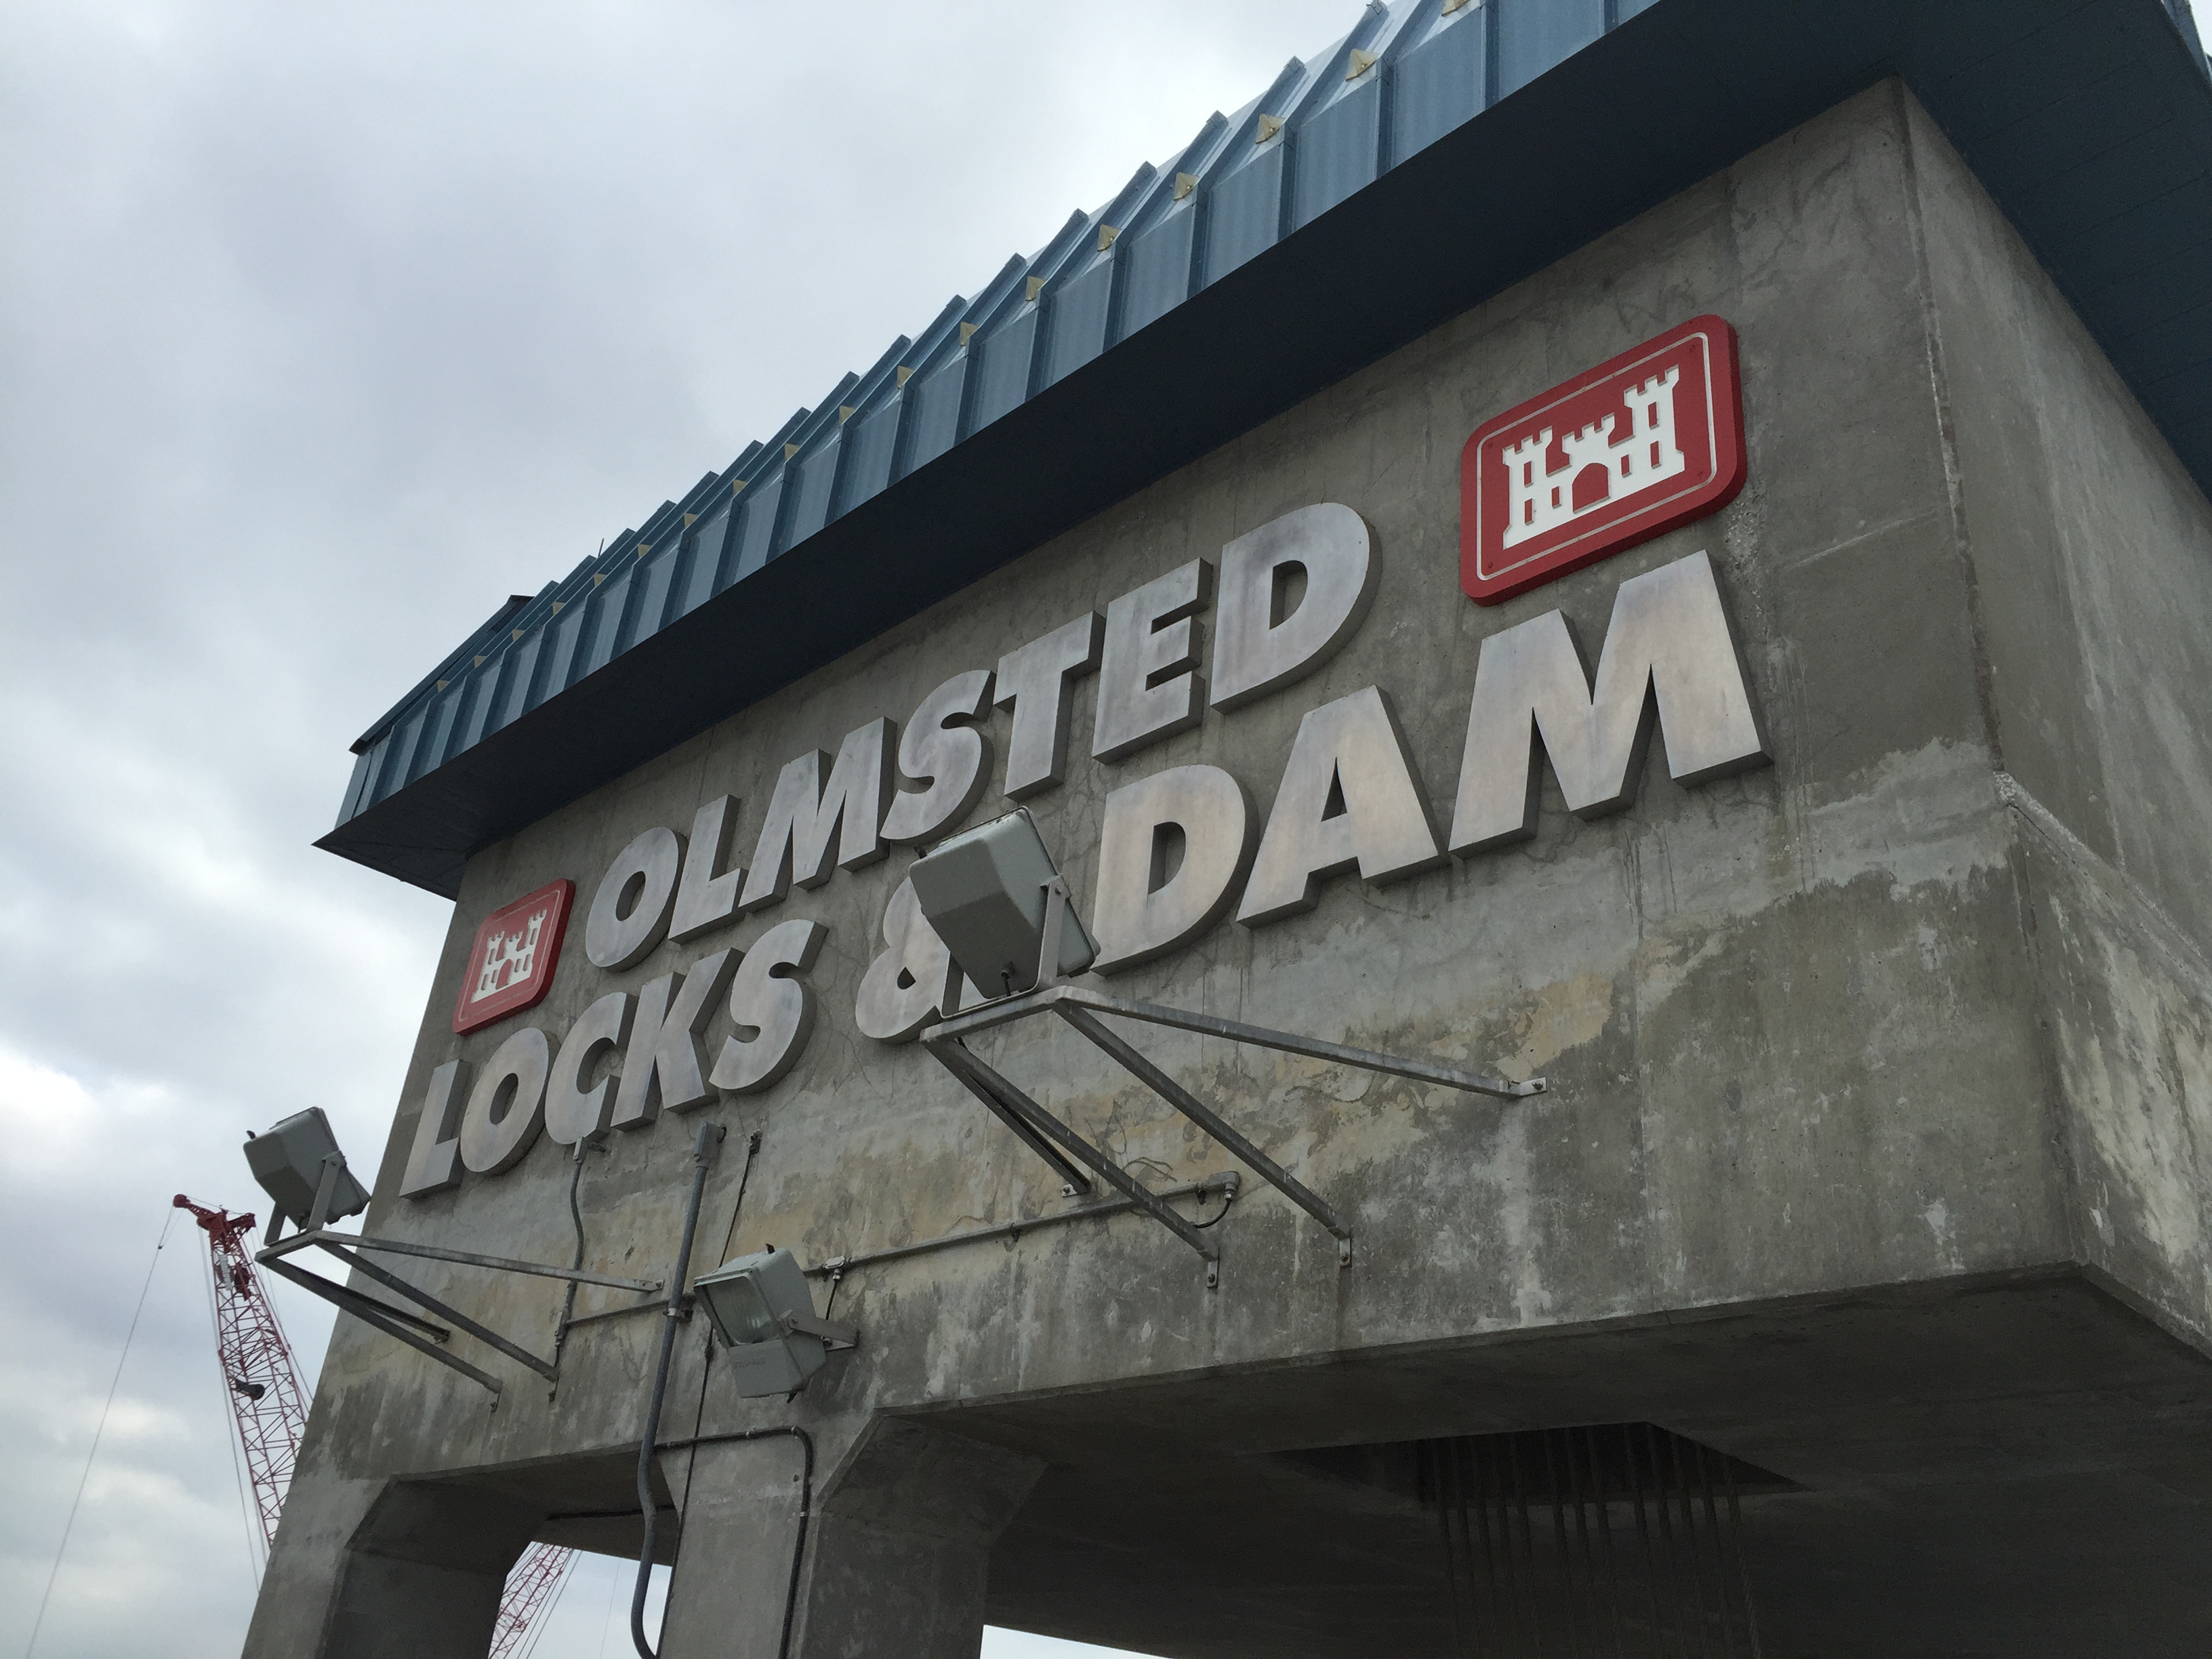 Olmsted is a multi-billion dollar fix for the Ohio, decades in the making.